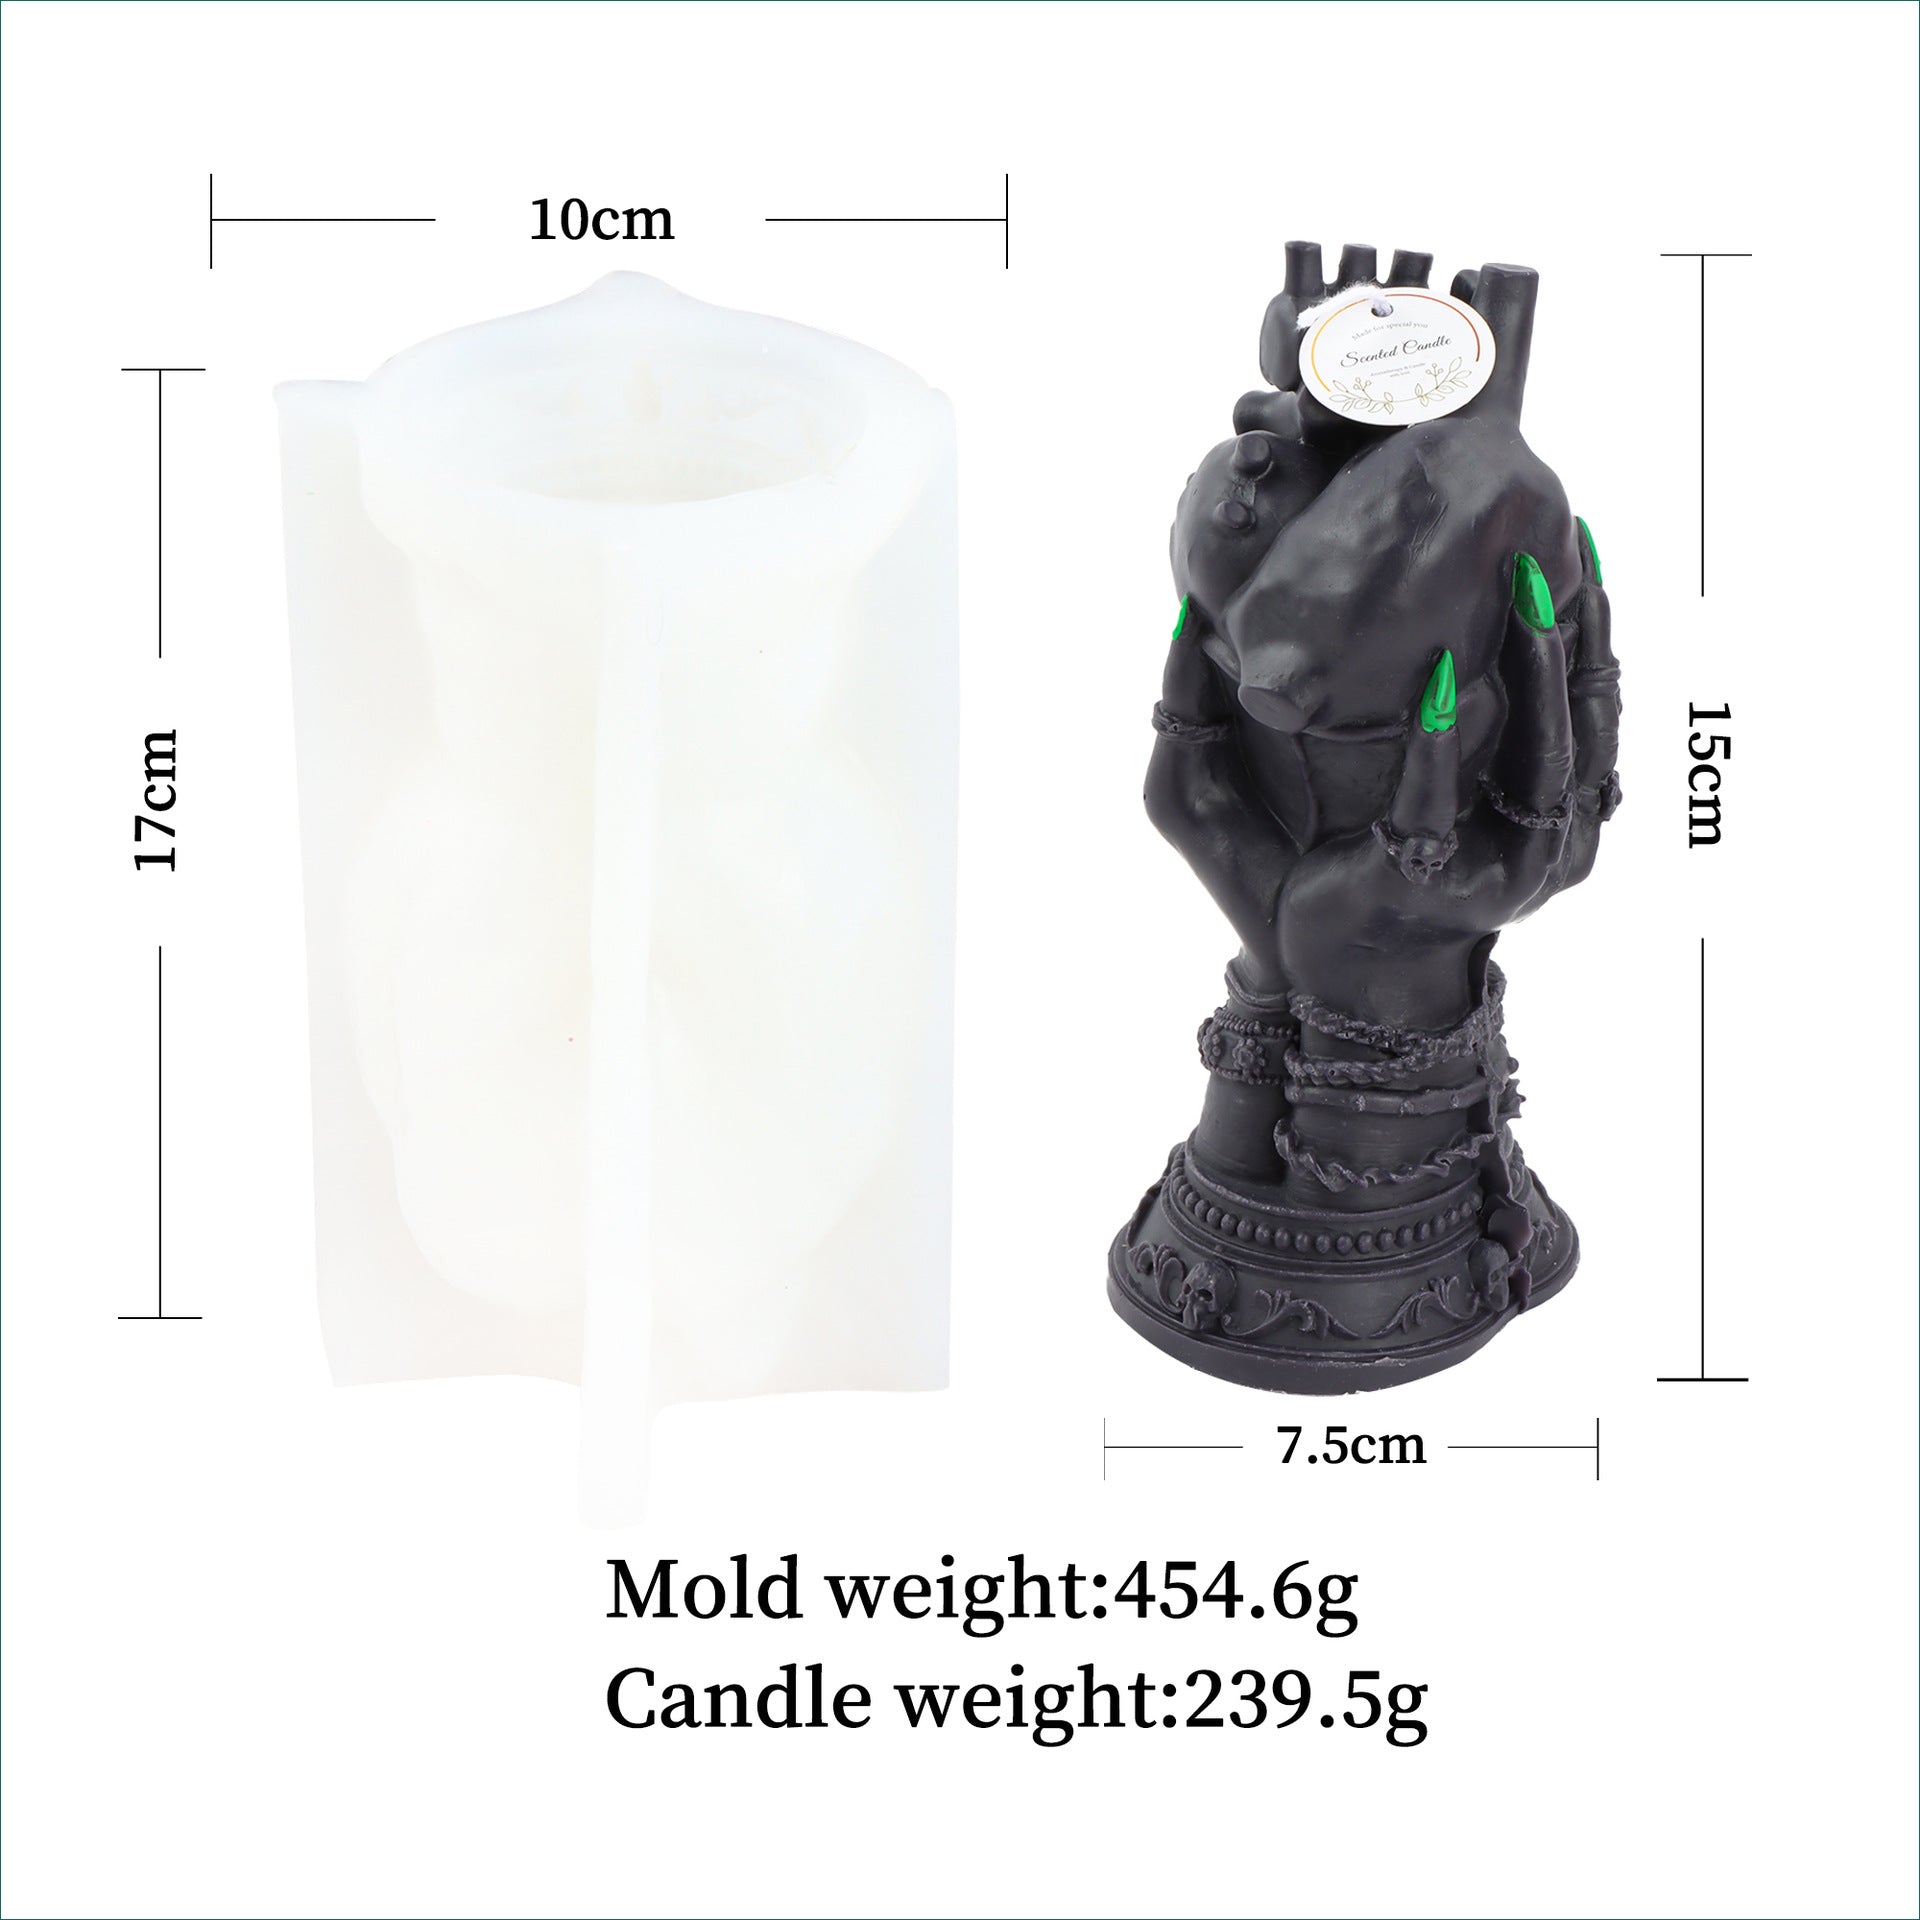 Enchanted Heart Candle Mould 2 - Silicone Mould, Mold for DIY Candles. Created using candle making kit with cotton candle wicks and candle colour chips. Using soy wax for pillar candles. Sold by Myka Candles Moulds Australia